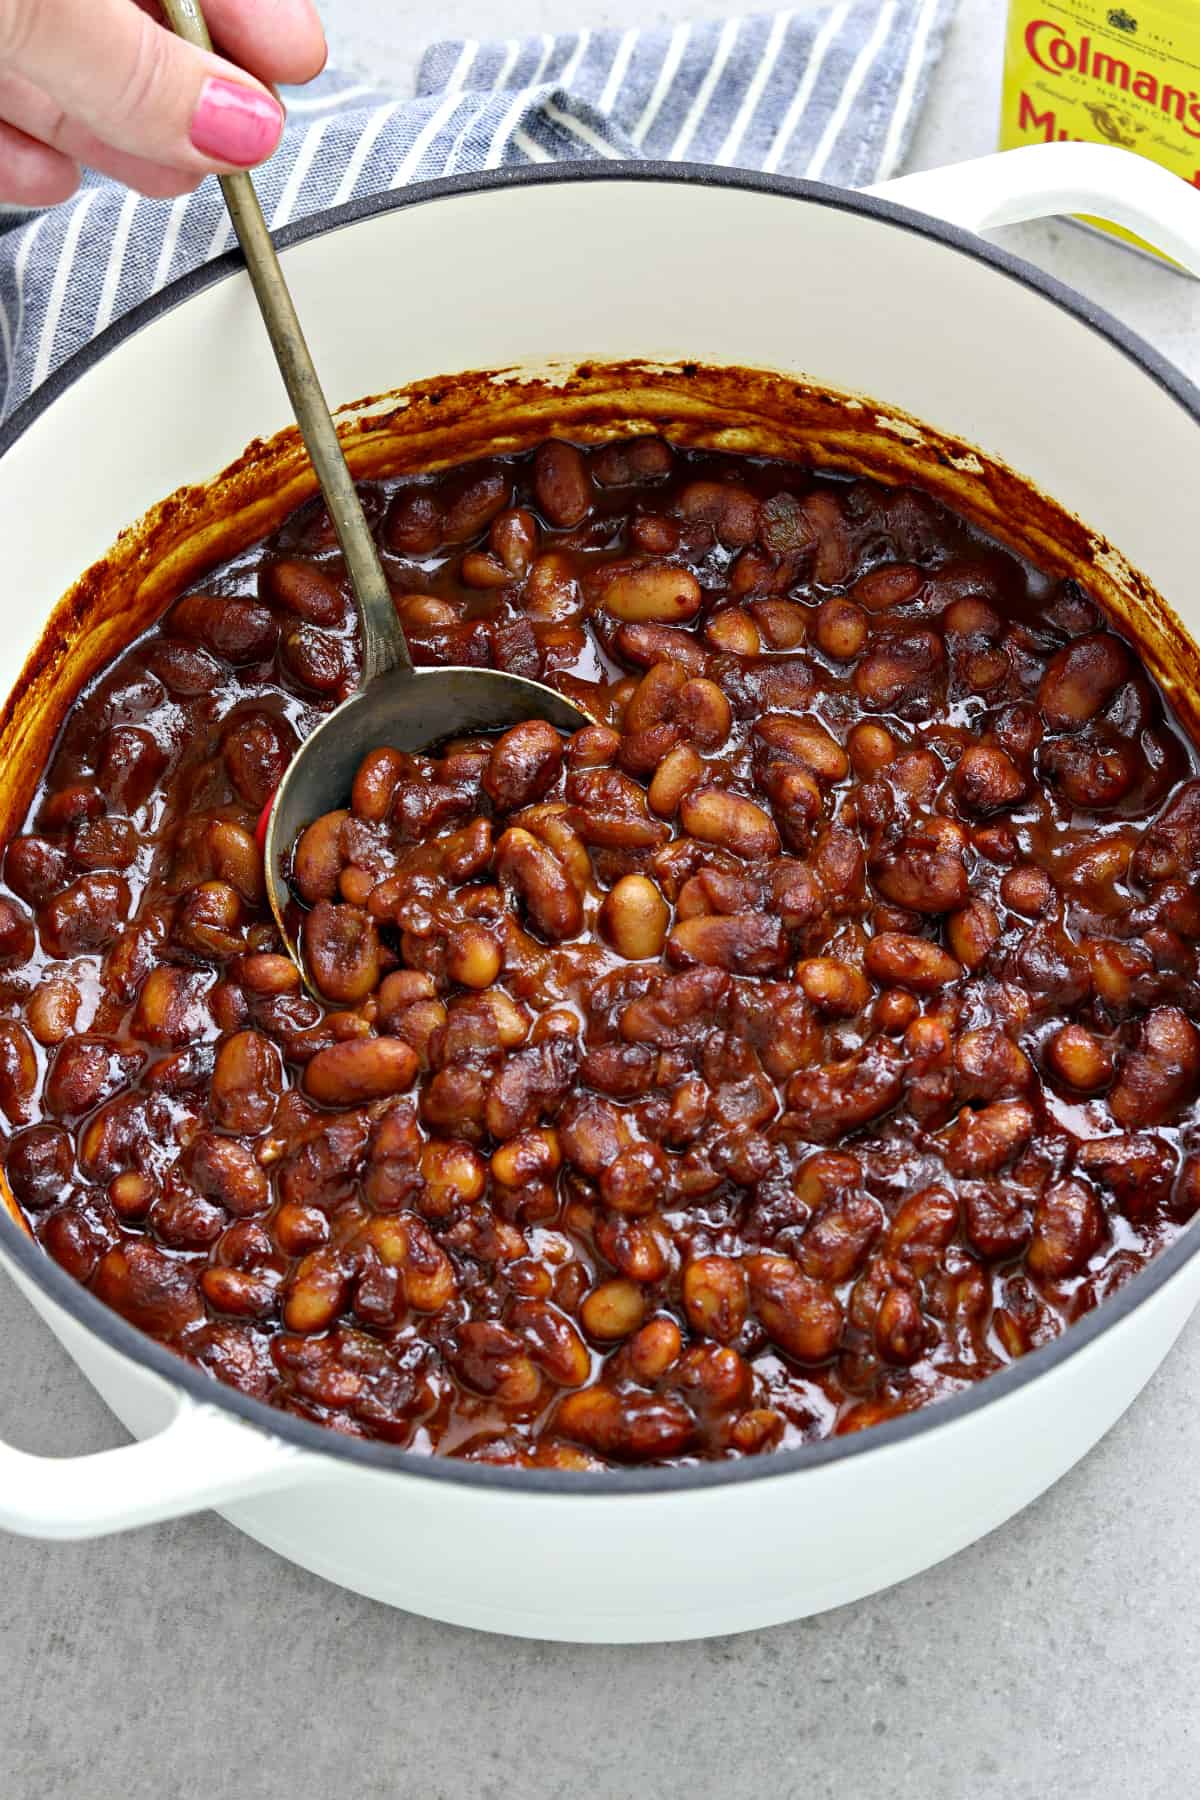 overhead view of baked beans in a white pot. Hand holding spoon and stirring beans.